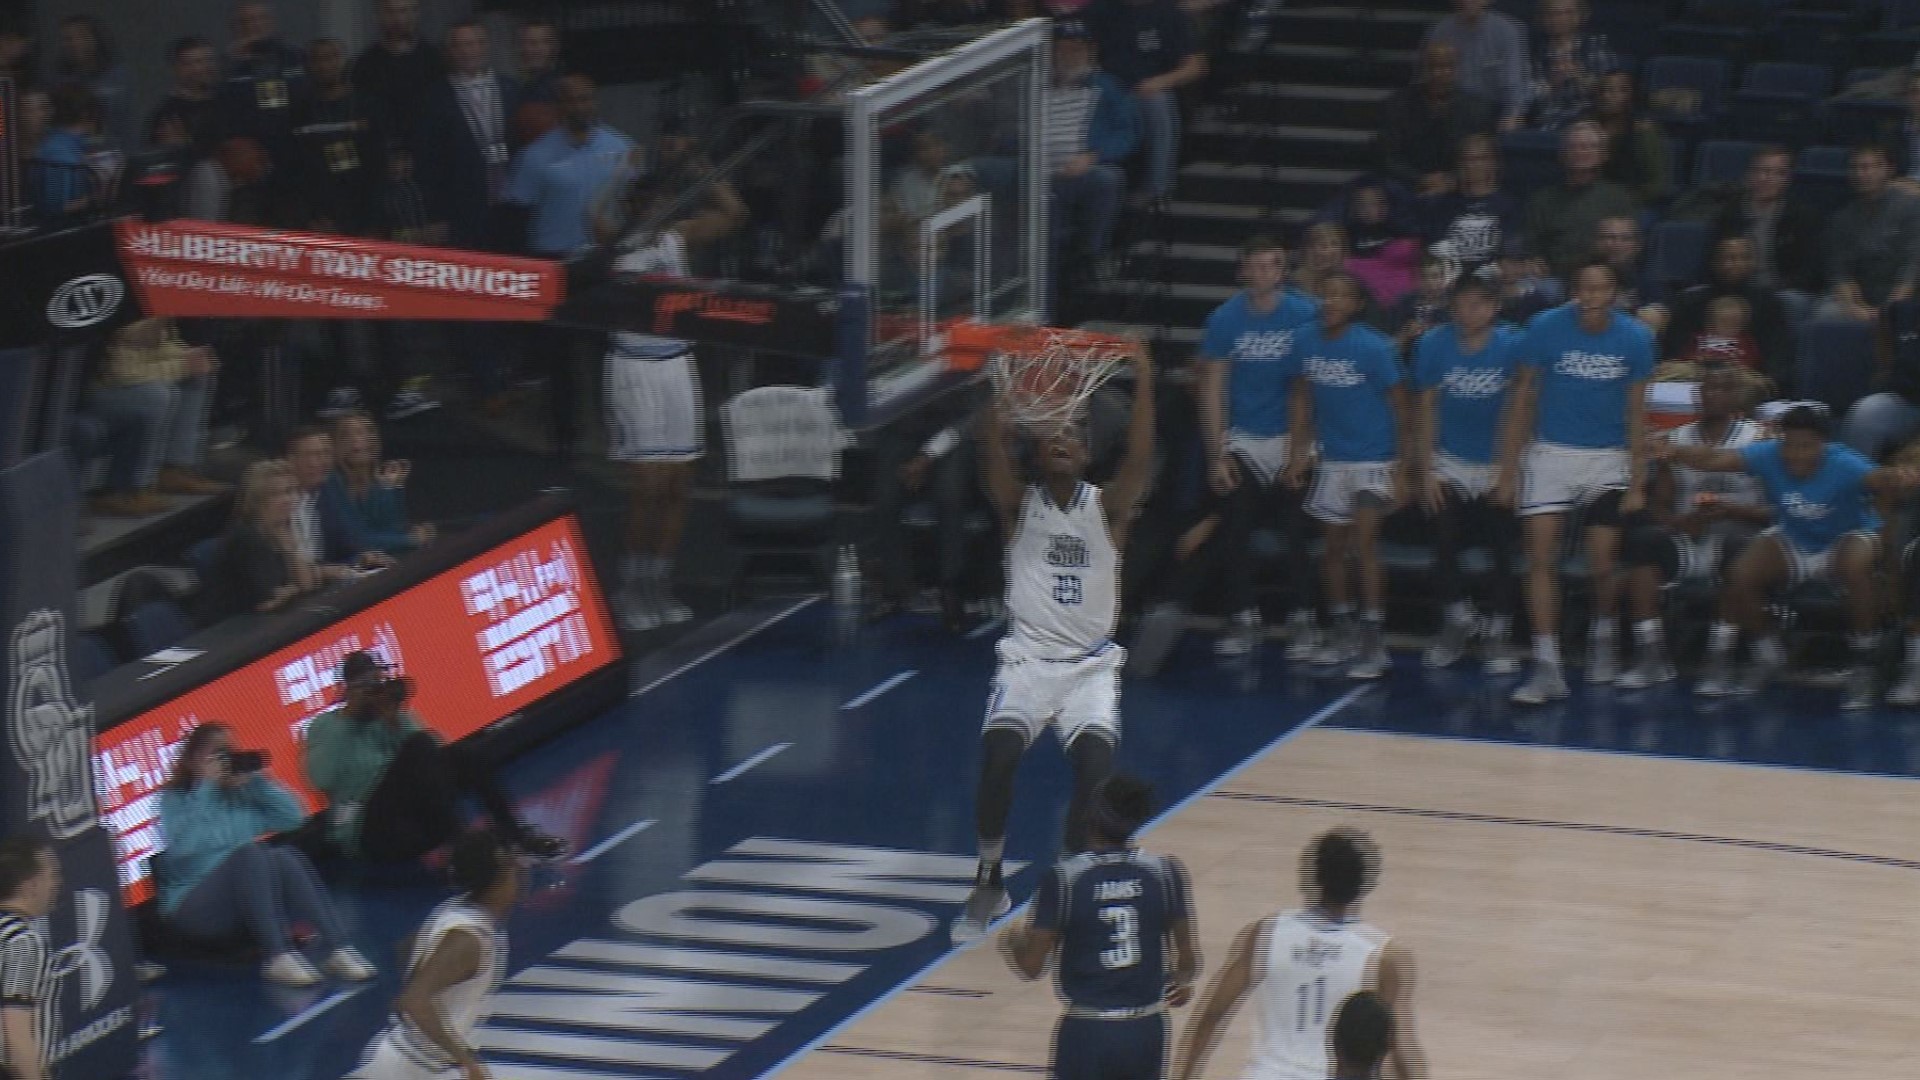 ODU's B.J. Stith capped a 15-6 run with a 3-pointer to give ODU a 50-45 lead with 12 1/2 minutes to play.